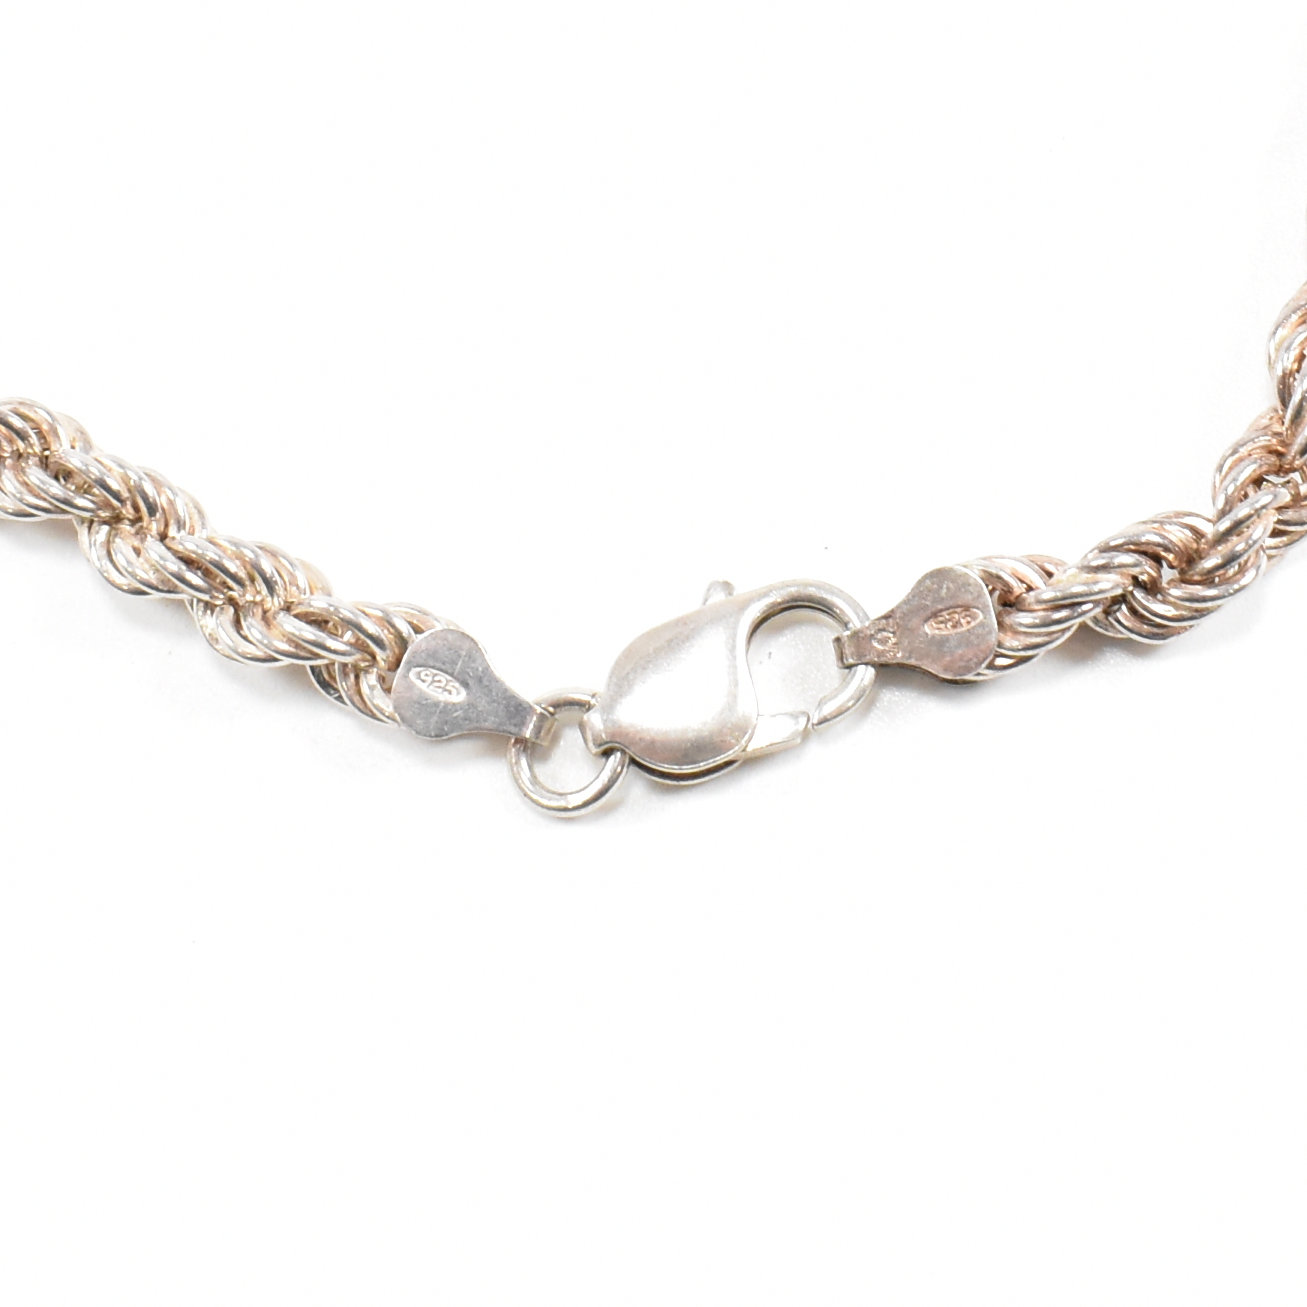 HALLMARKED 925 SILVER ROPE TWIST CHAIN NECKLACE - Image 4 of 6